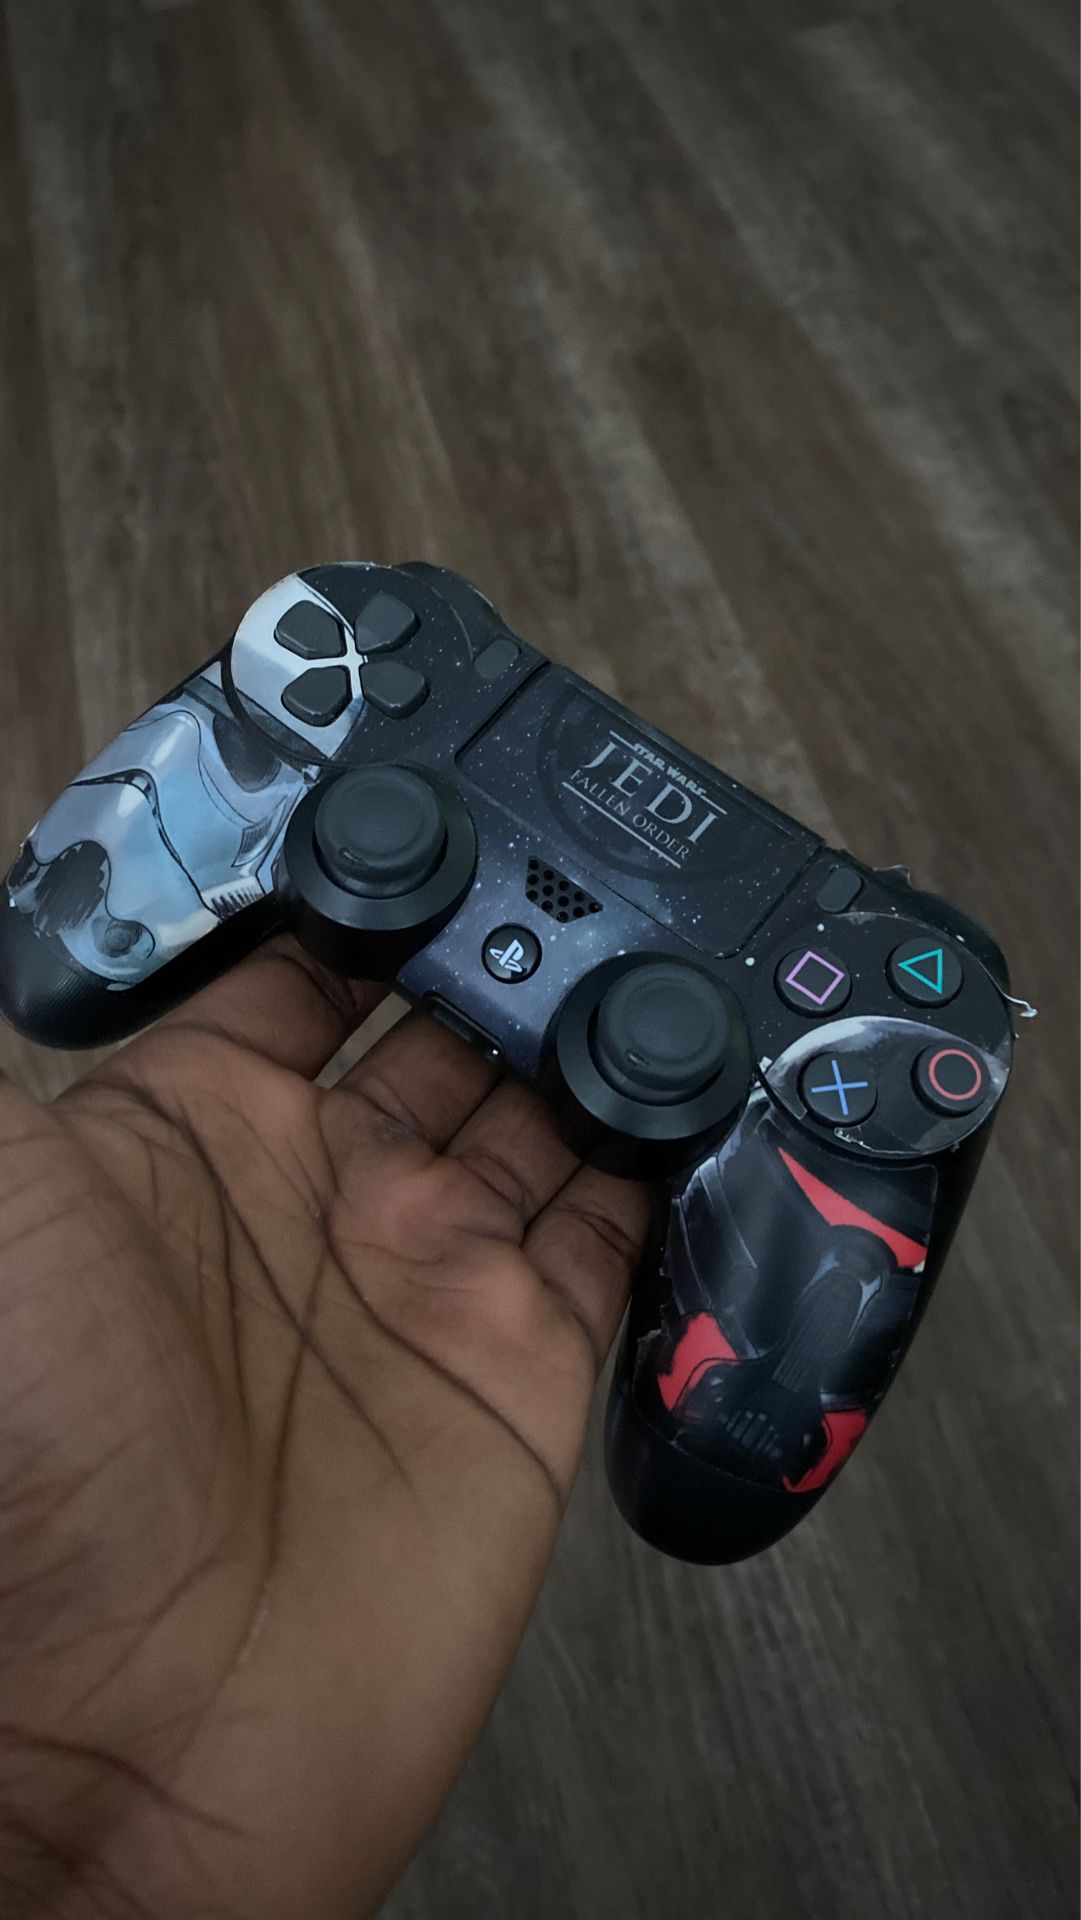 Customized ps4 controller